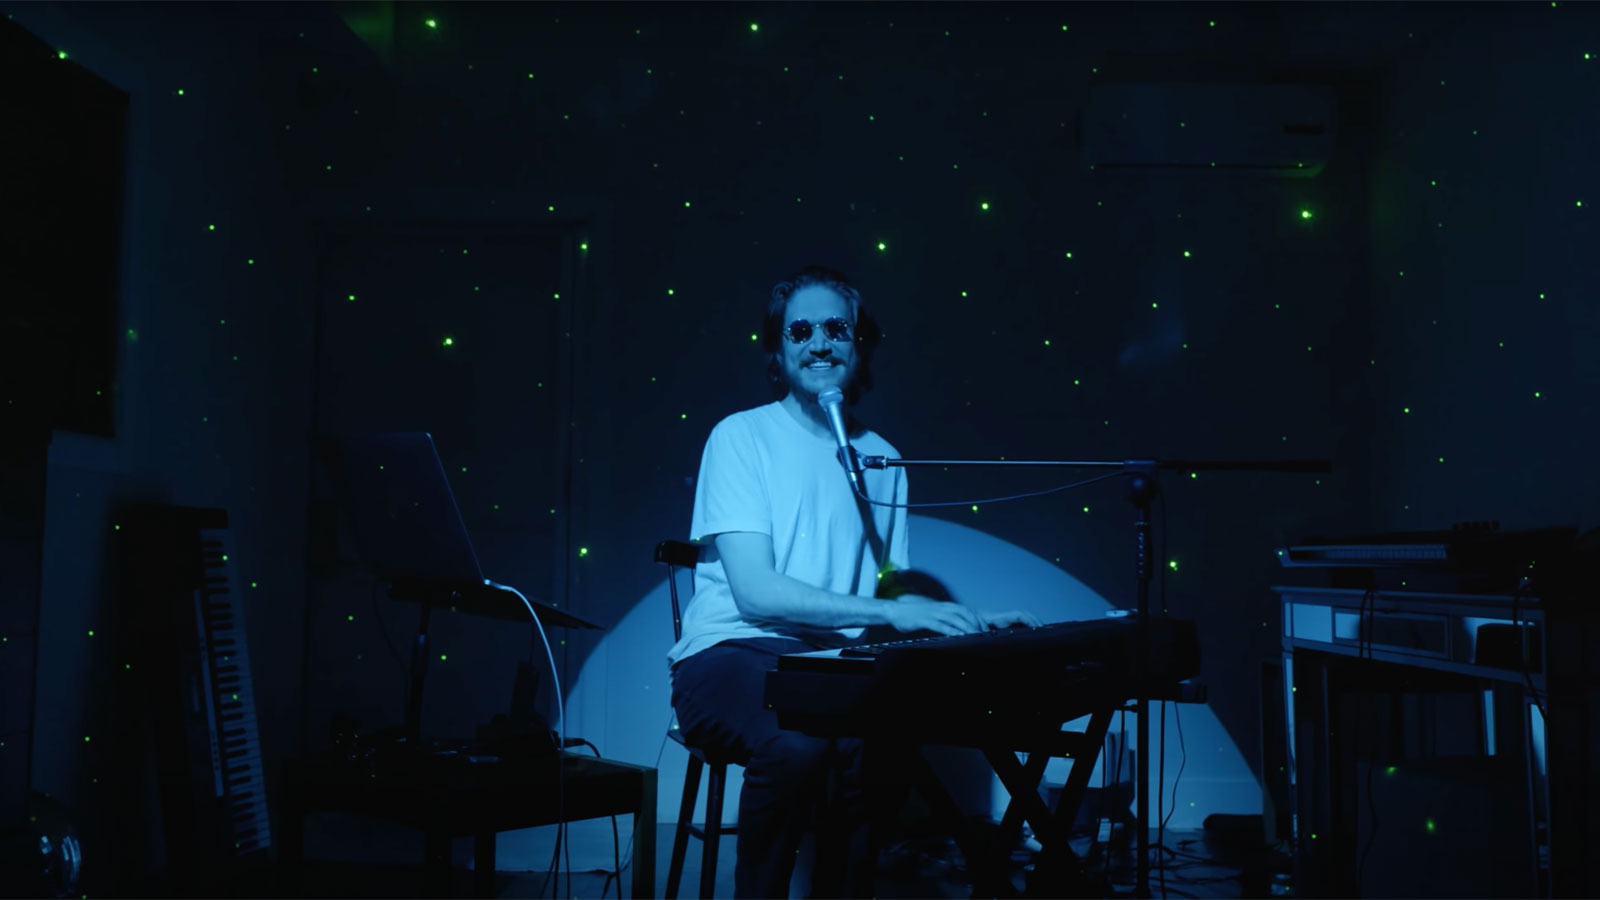 A man wearing sunglasses plays the keyboard while a blue spotlight shines on him, with a starry sky projected in the background